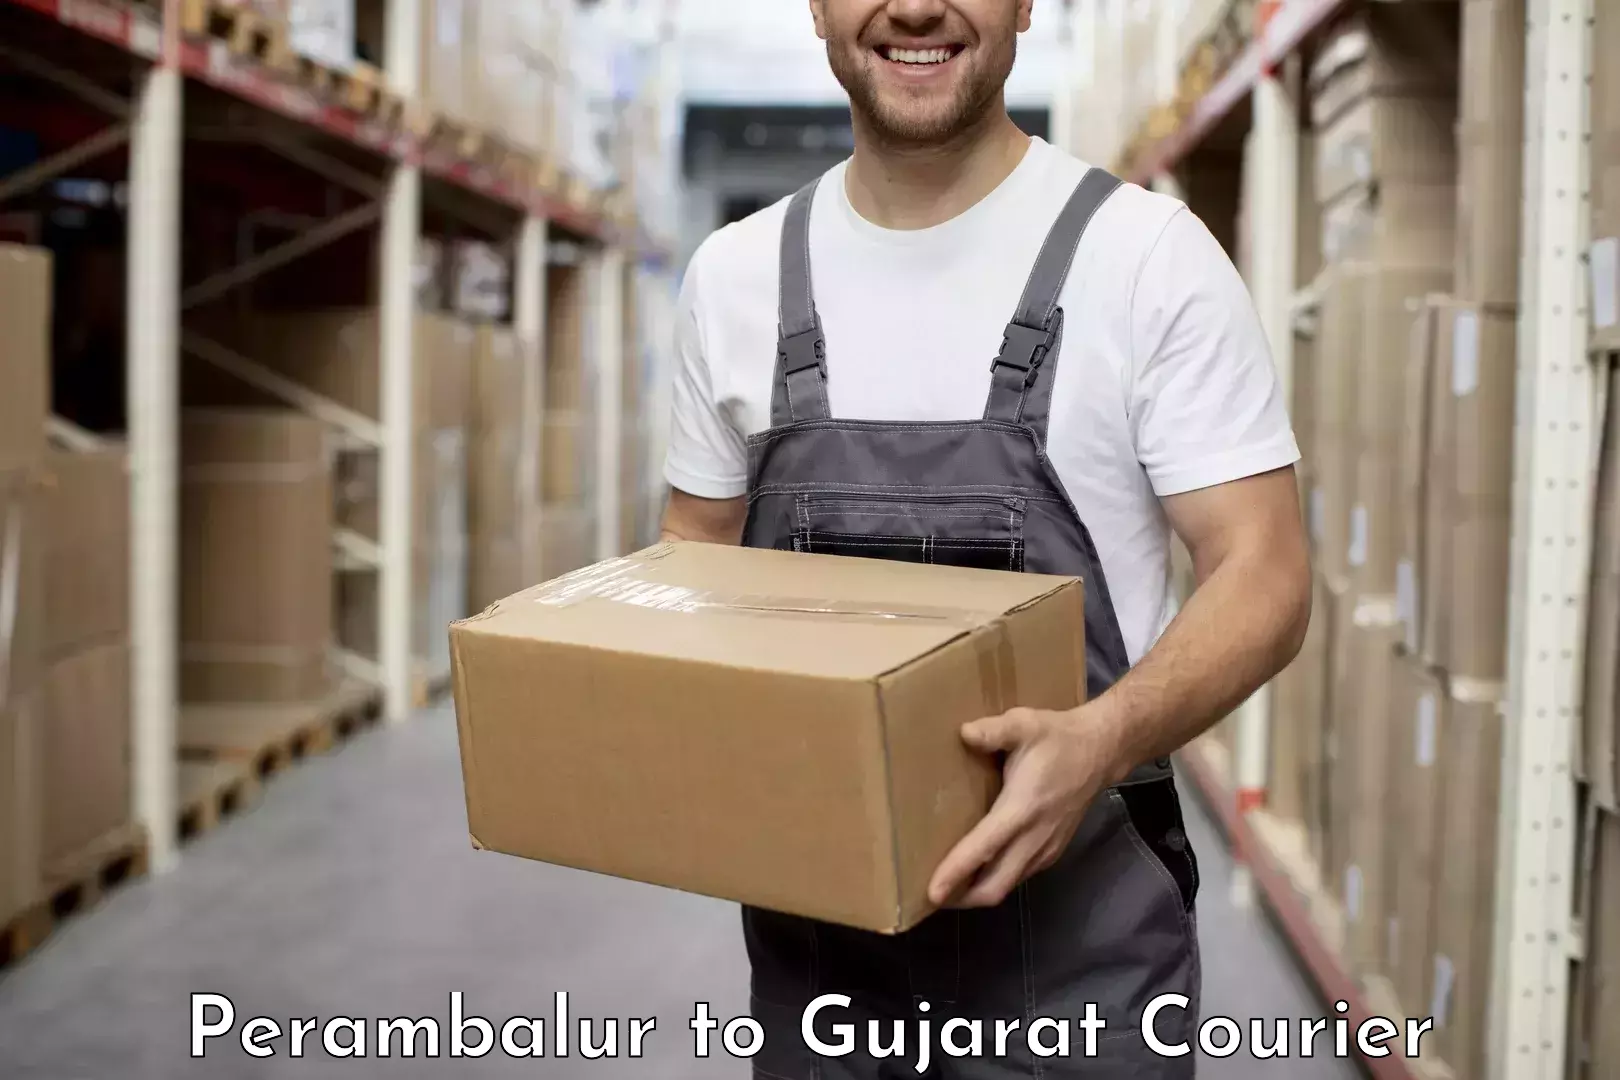 Local delivery service Perambalur to IIIT Surat